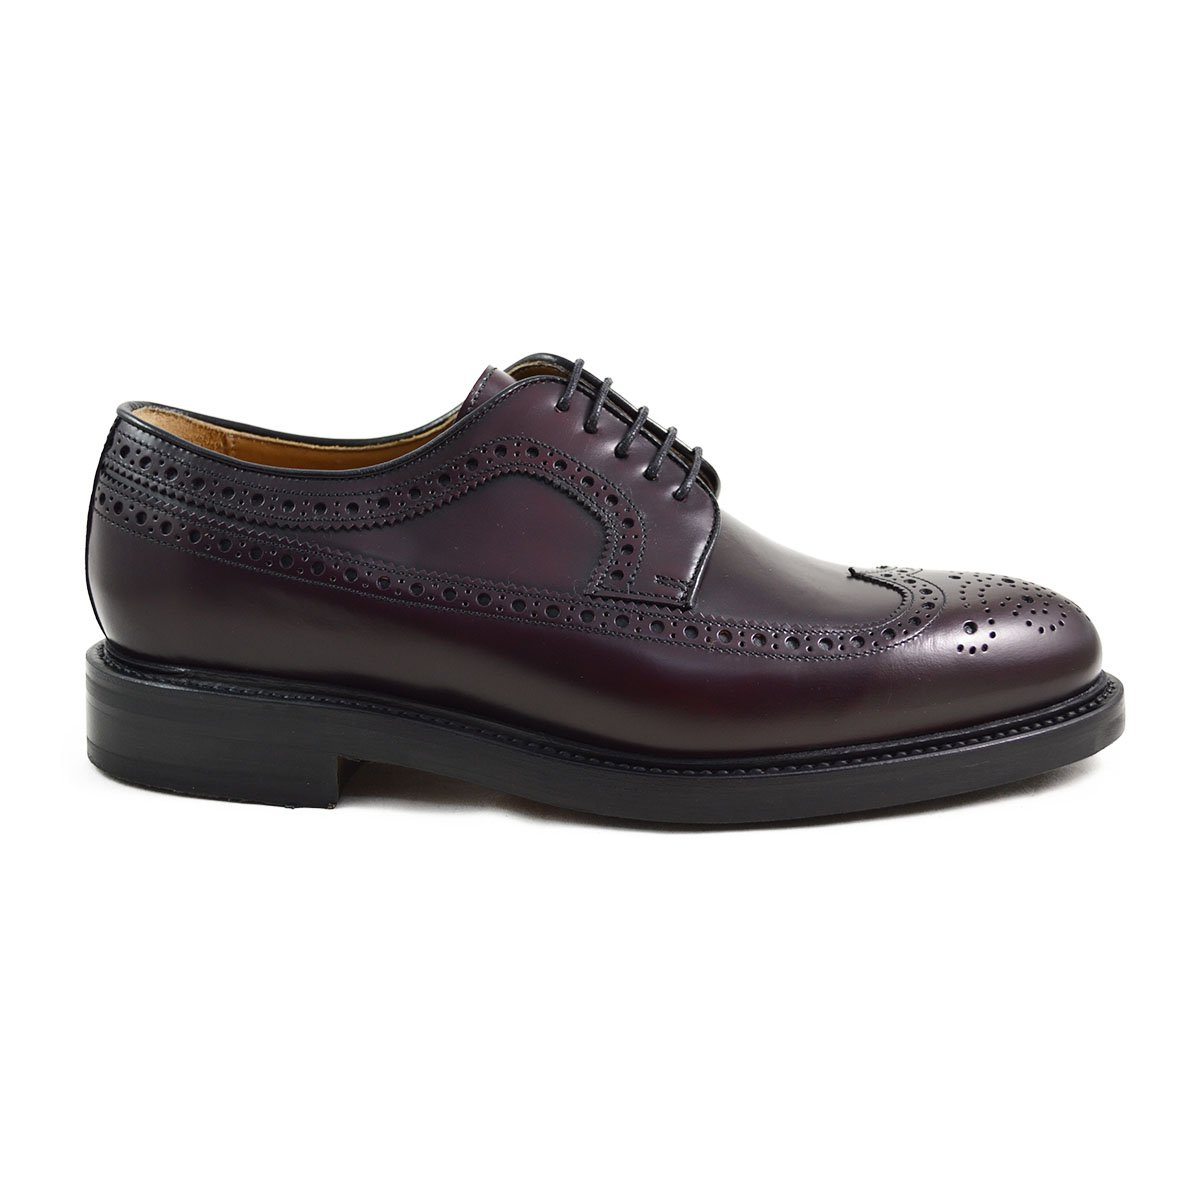 Berwick 1707 Long Wing Brogue (3681) - Burgundy Rois – A Fine Pair of Shoes